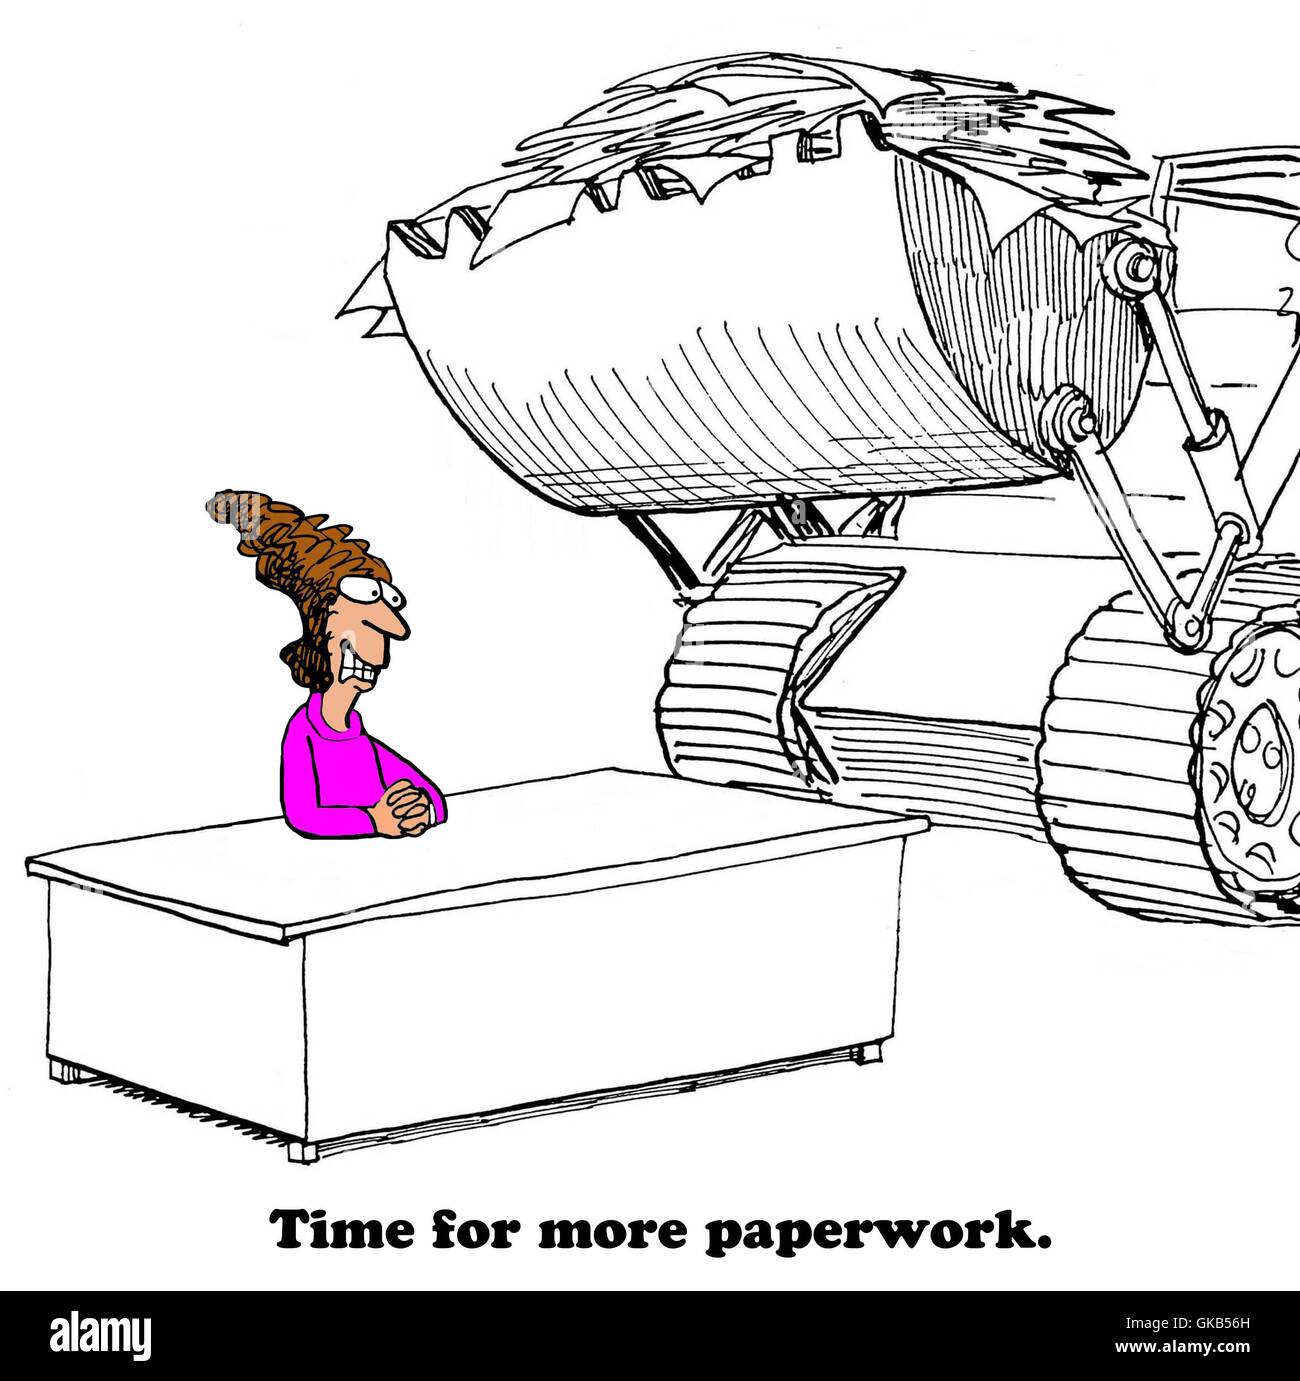 Business cartoon about too much paperwork. Stock Photo